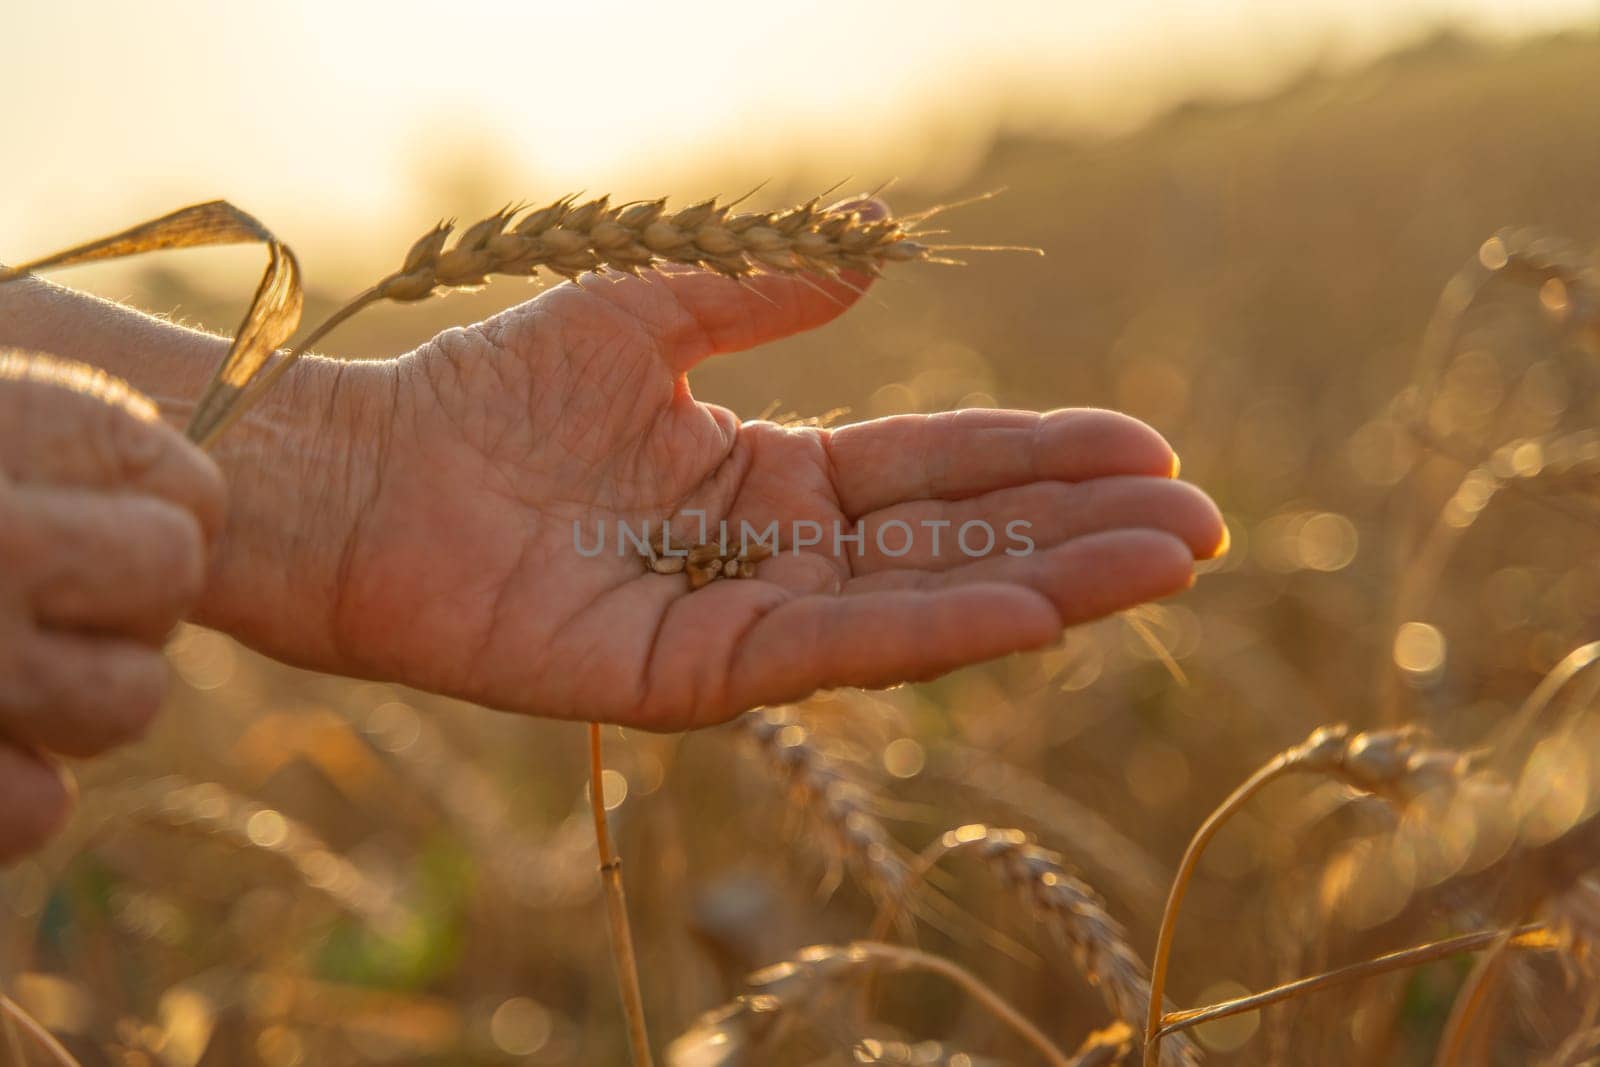 Close up of senior farmers hands holding and examining grains of wheat of wheat against a background of ears in the sunset light